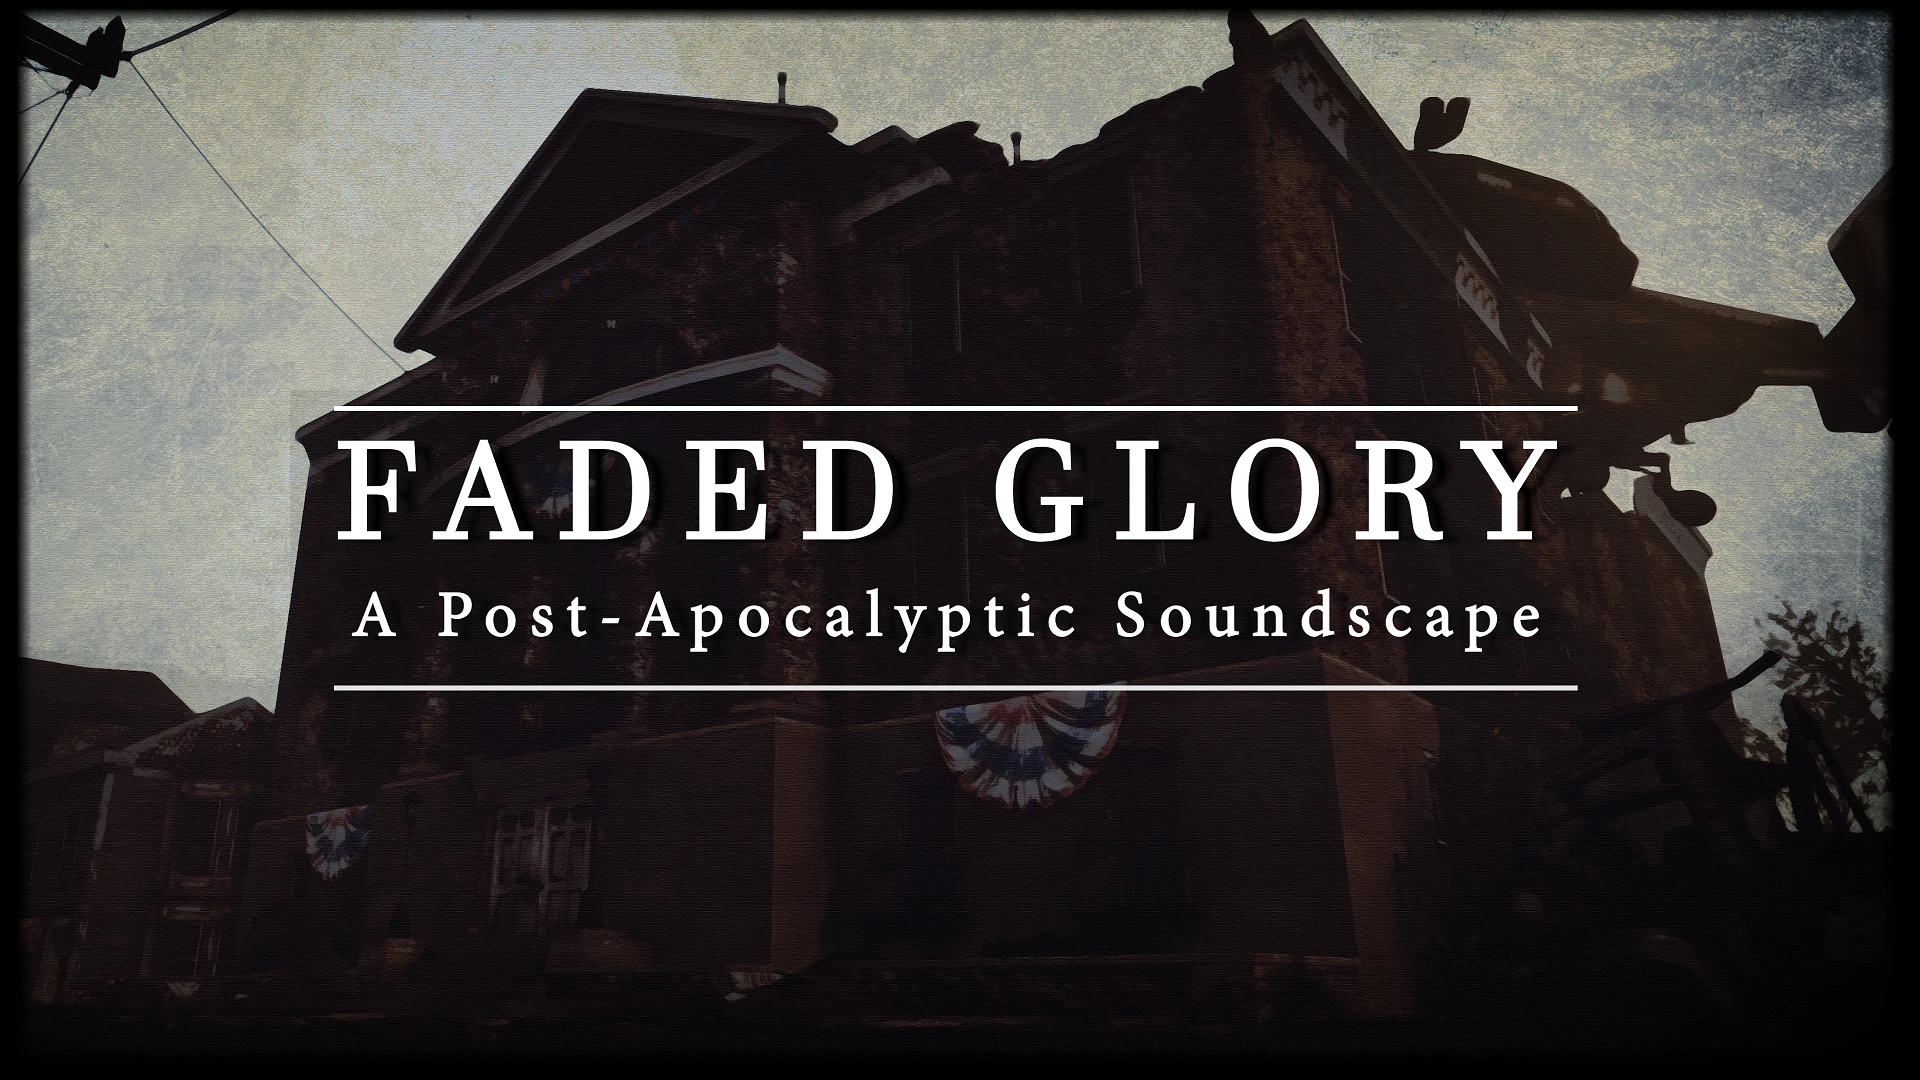 Faded Glory - A Post-Apocalyptic Soundscape at Fallout 4 Nexus